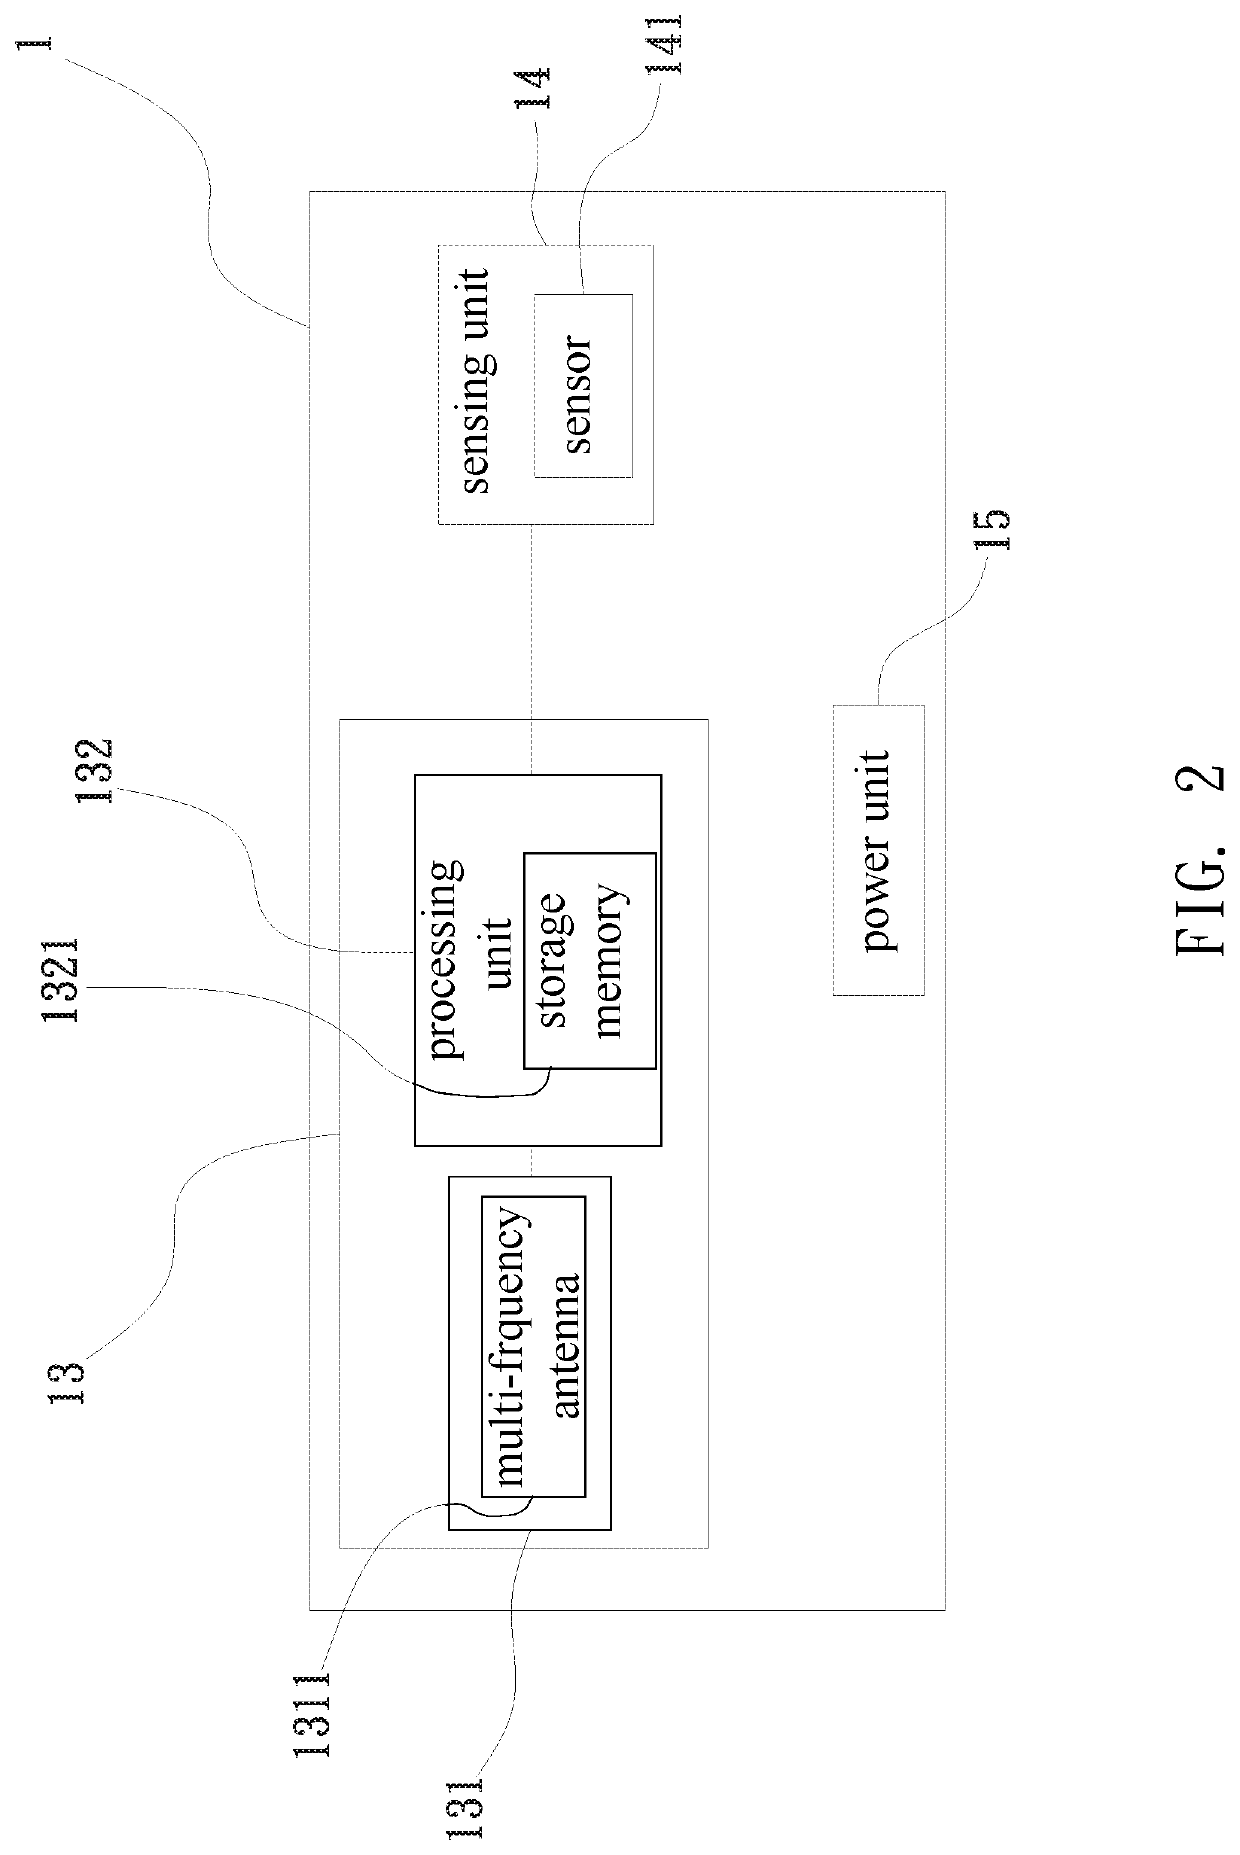 Structure and apparatus for tire pressure monitoring